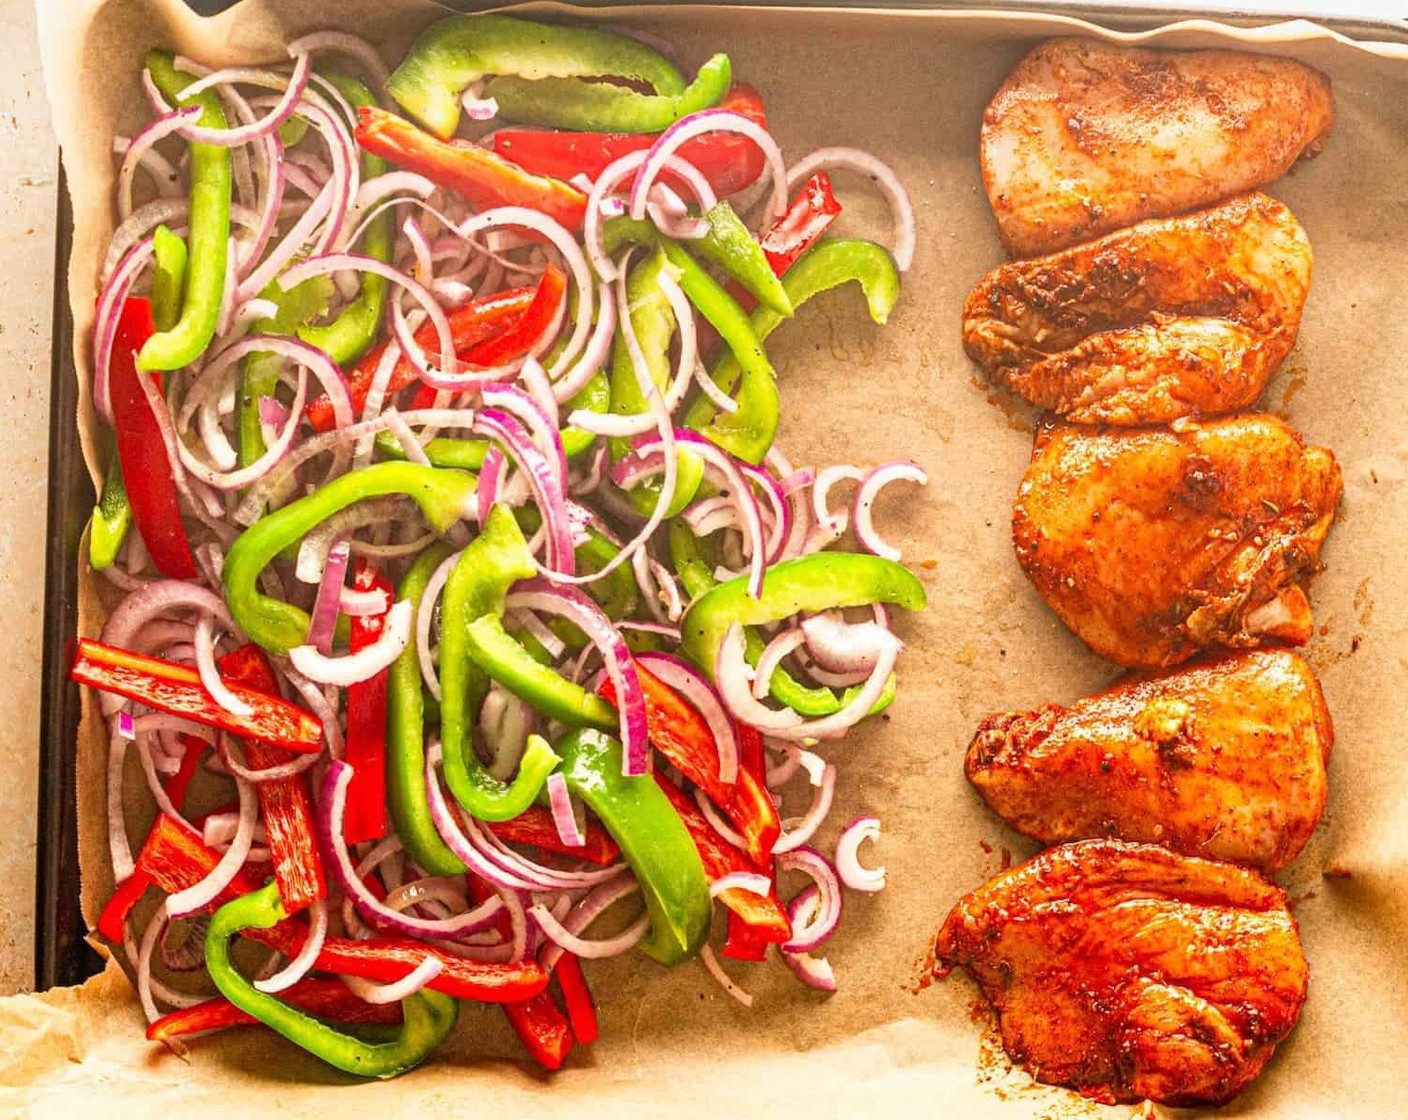 step 3 While the chicken is marinating, slice Red Onion (1) and Bell Peppers (2). Add them to a sheet pan and season with Olive Oil (1/2 Tbsp), Salt, and Ground Black Pepper (1/4 tsp) to taste. Place the chicken on the sheet pan with the vegetables.